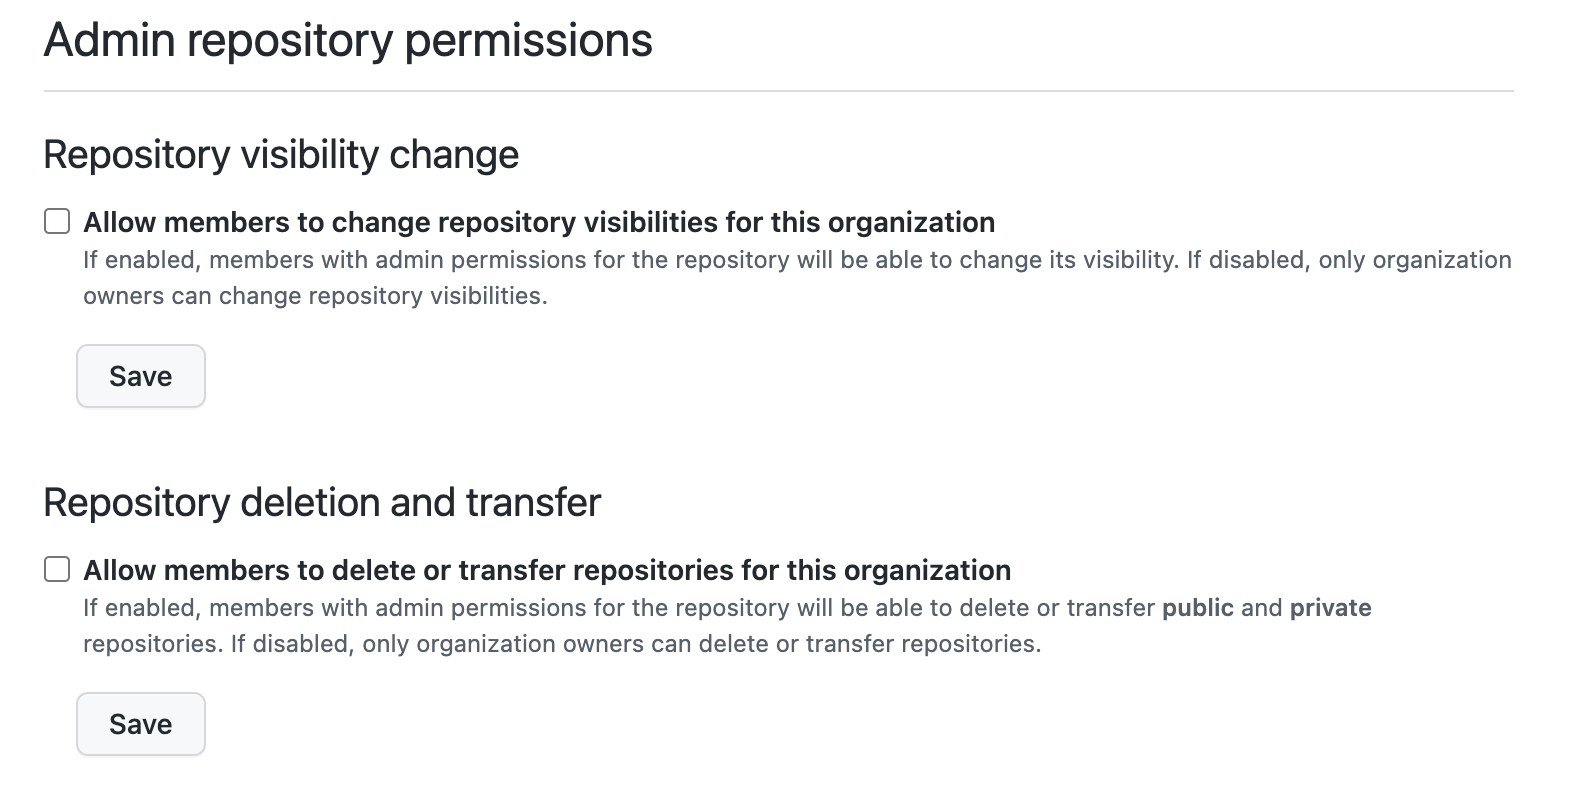 Visibility change and repo deletion and transfer to uncheck!